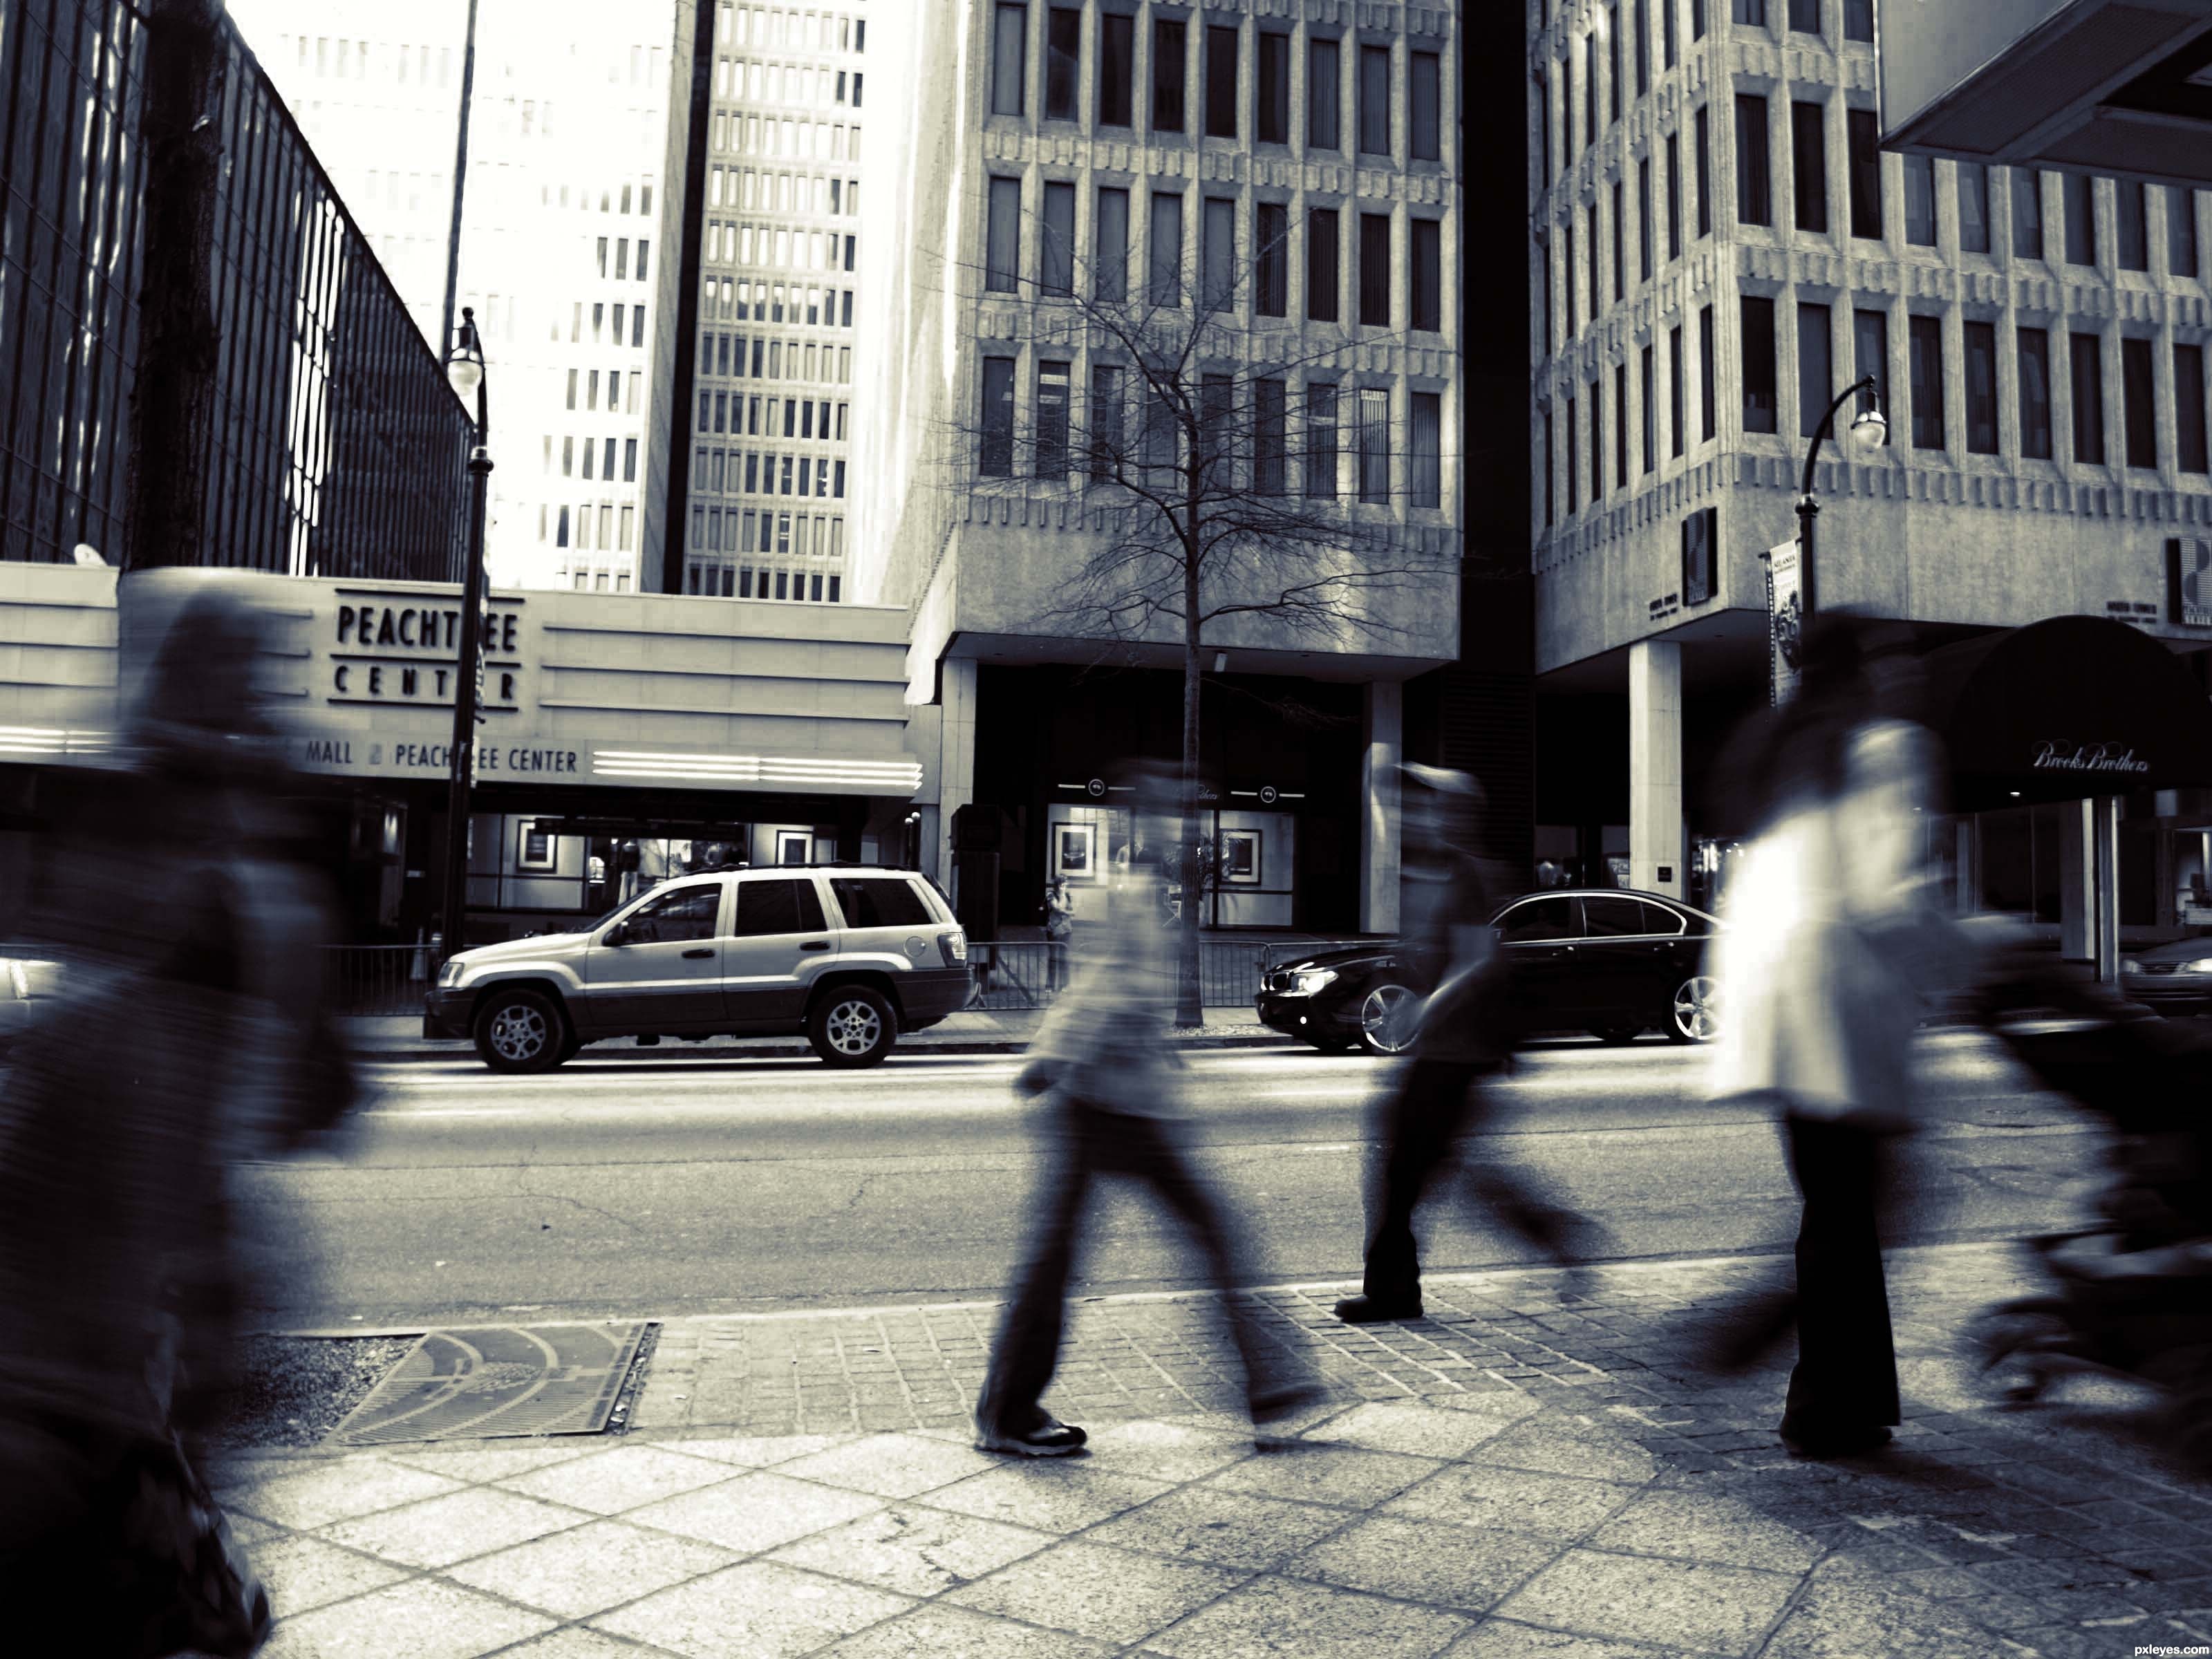 Atl's street life picture, by emilymnewell for: street life ...